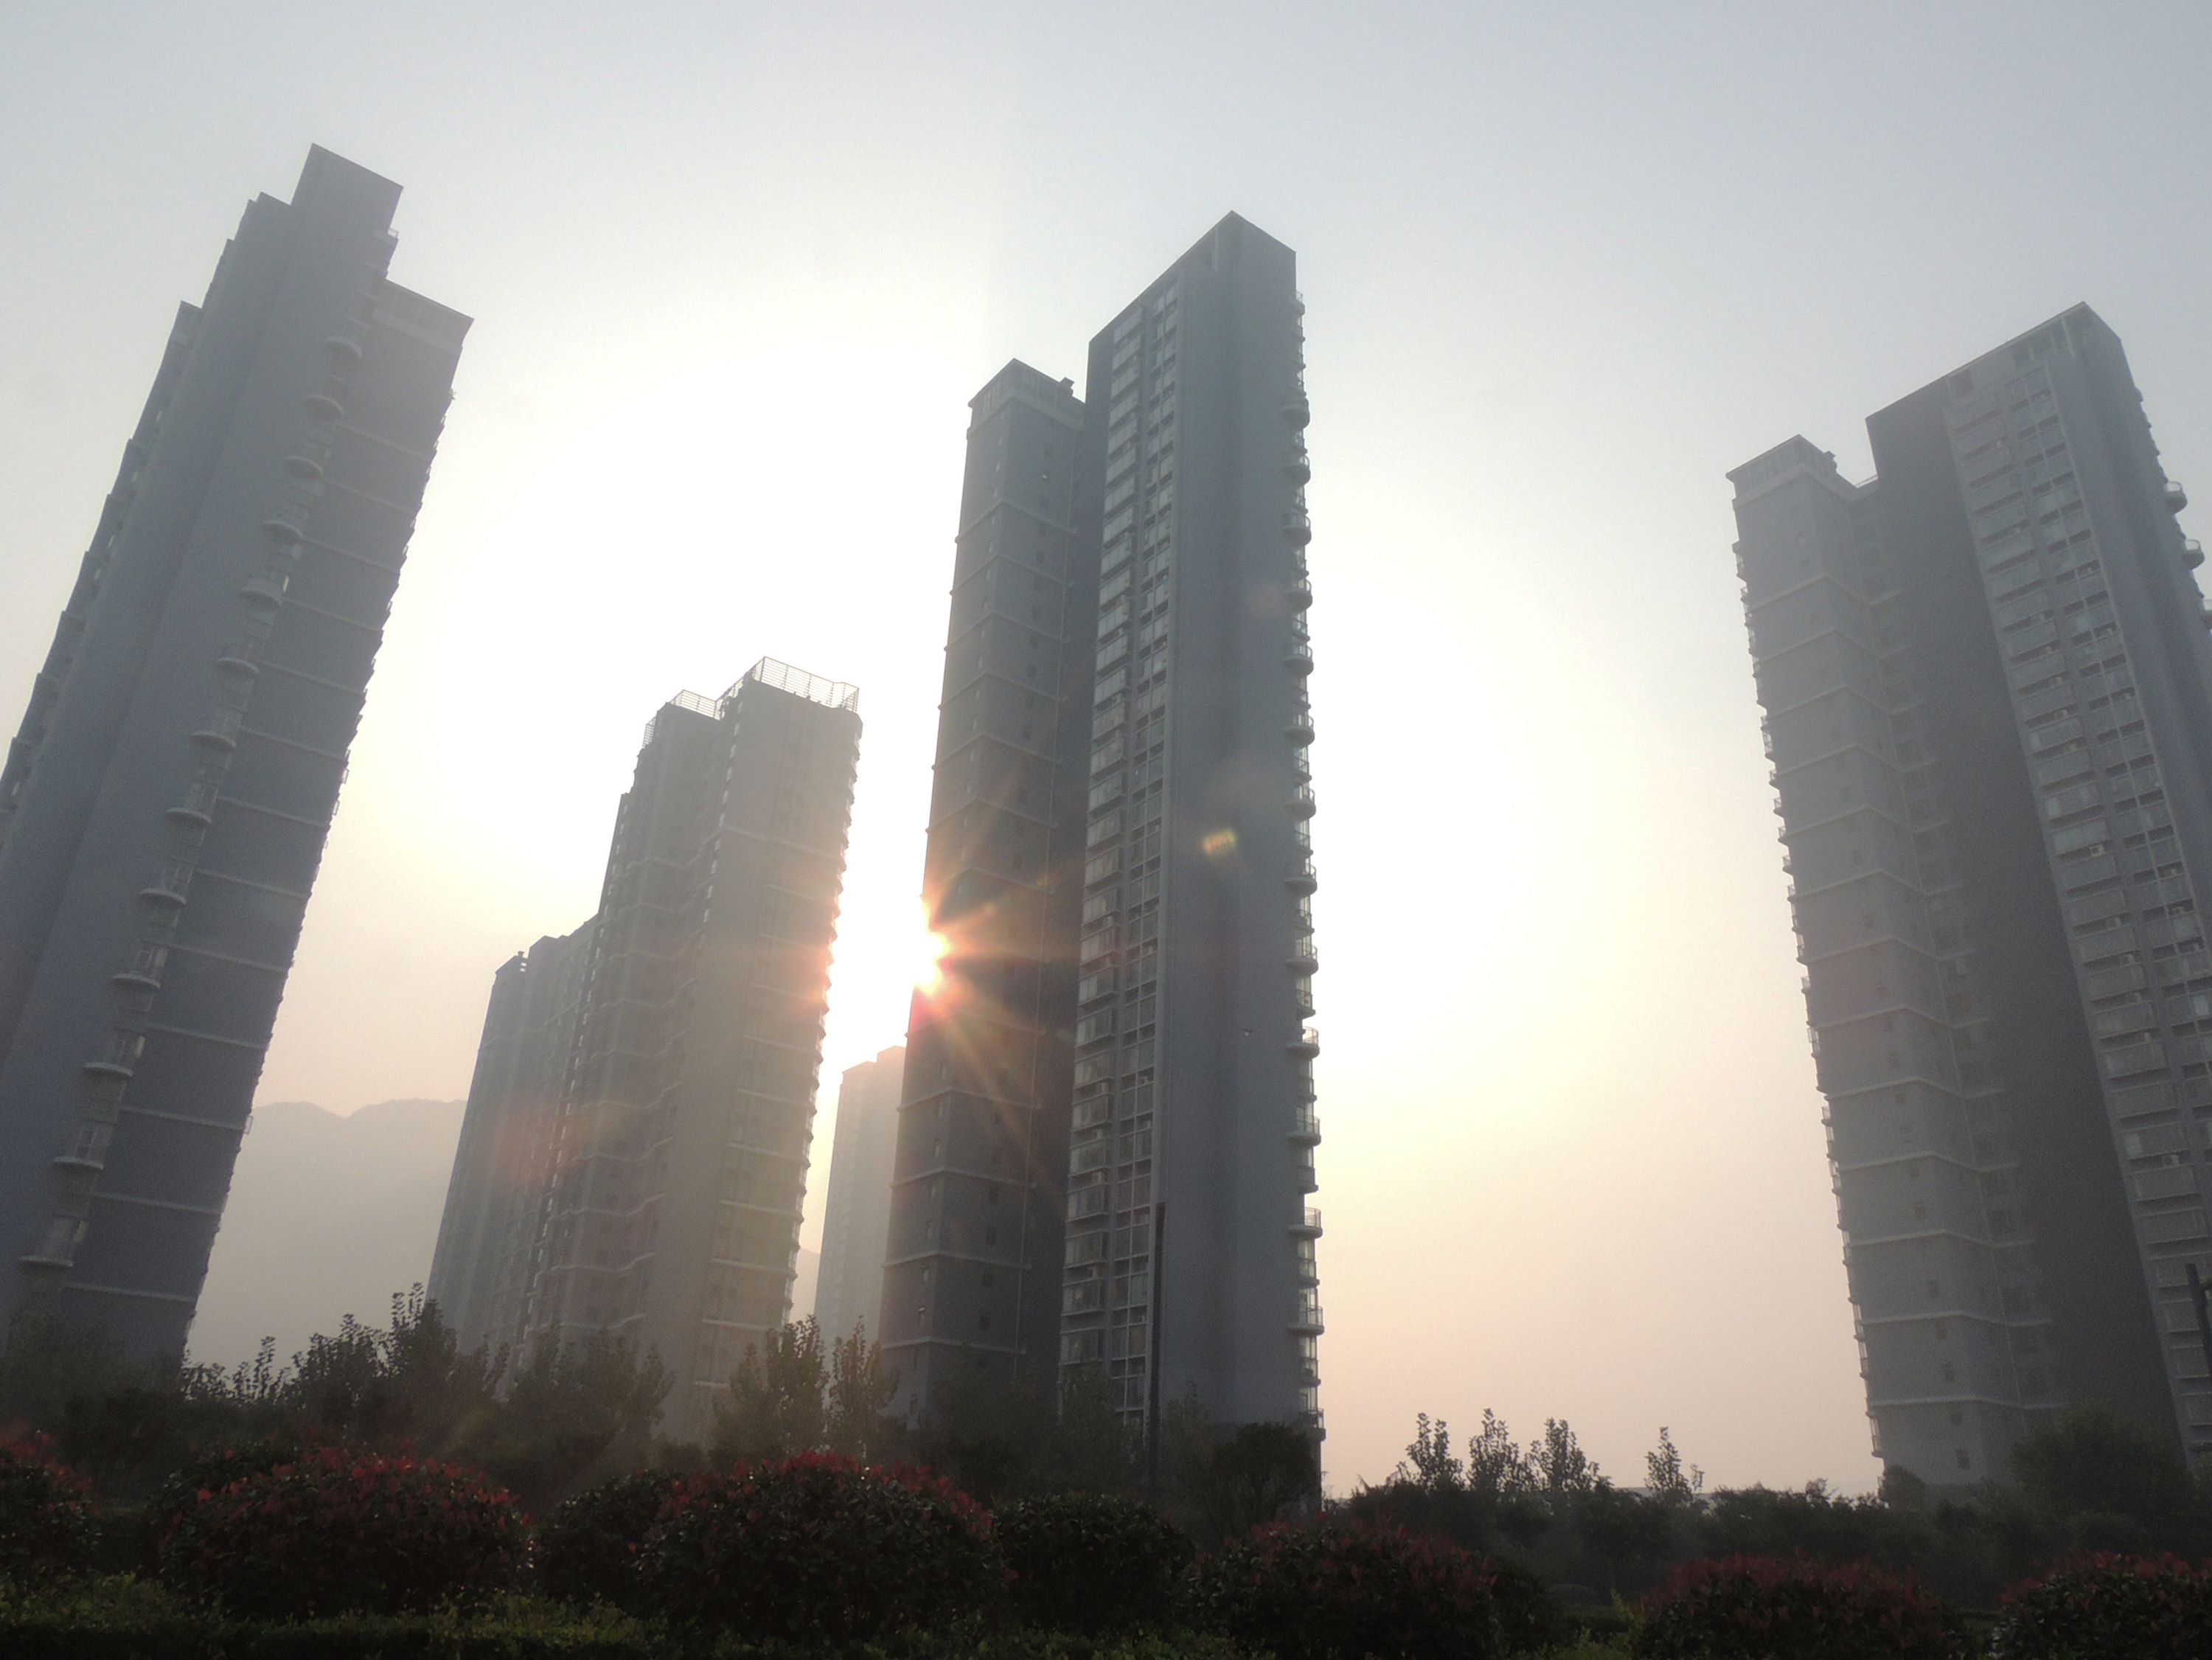 This picture taken on October 18, 2015 shows buildings in a residential district covered with smog in Lianyungang, east China's Jiangsu province. China's economic growth slowed to 6.9 percent in the third quarter, authorities in the world's second-largest economy said on October 19, as global markets worry about its prospects. CHINA OUT AFP PHOTO